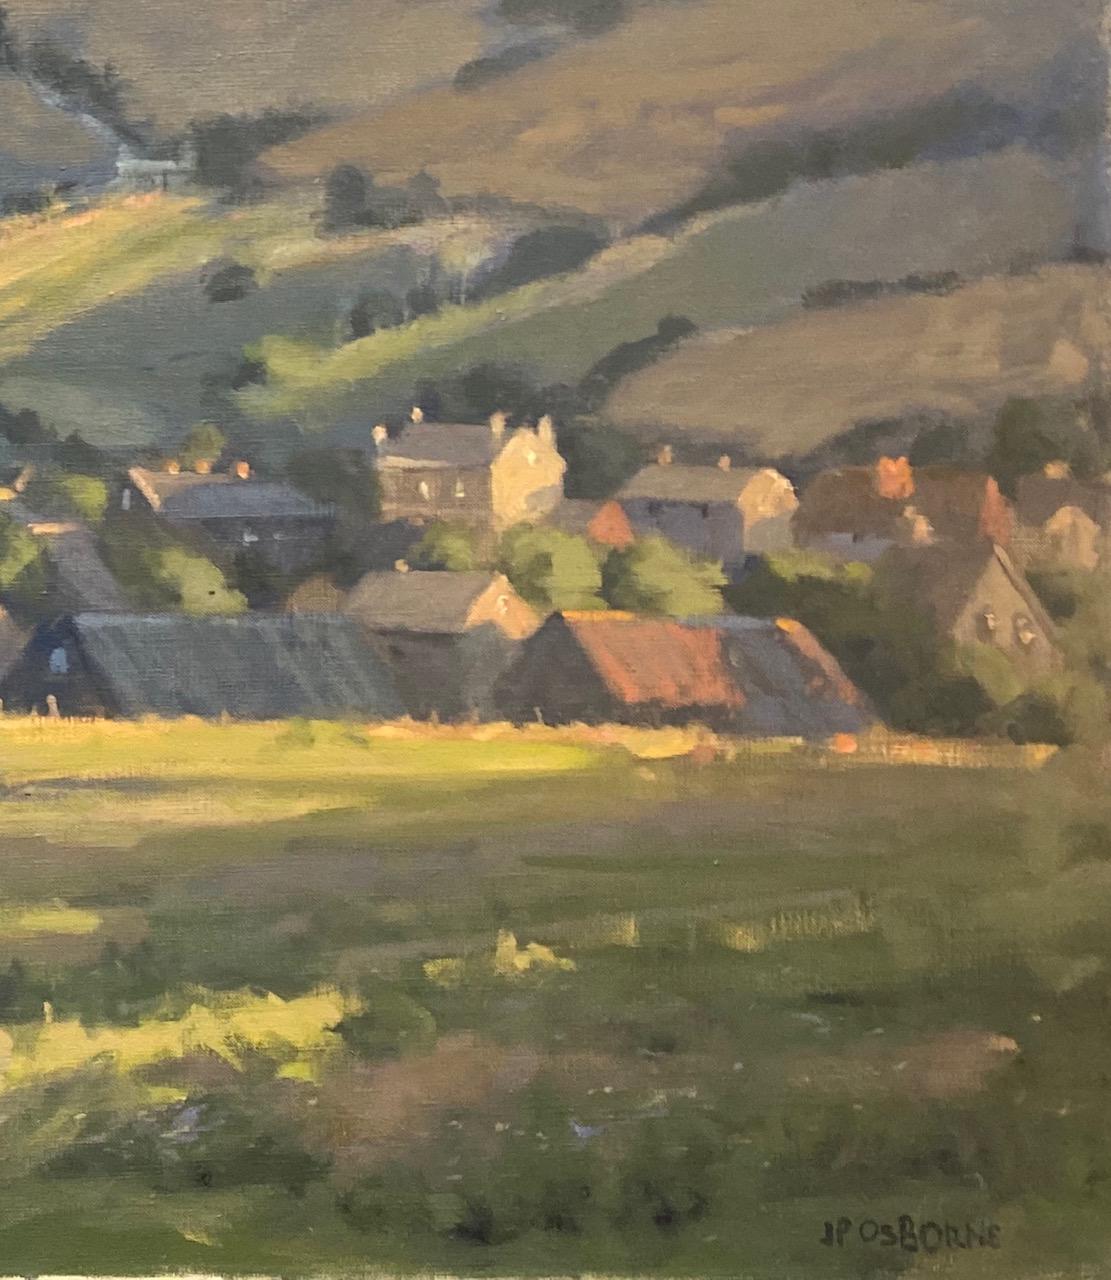 Known for it's timeless charm, the quaint Cotswolds of England are what dreams are made of.  The tranquil majesty overlooking the Winchcomb countryside depicted in this original impressionist landscape exemplifies the warm and inviting feeling of